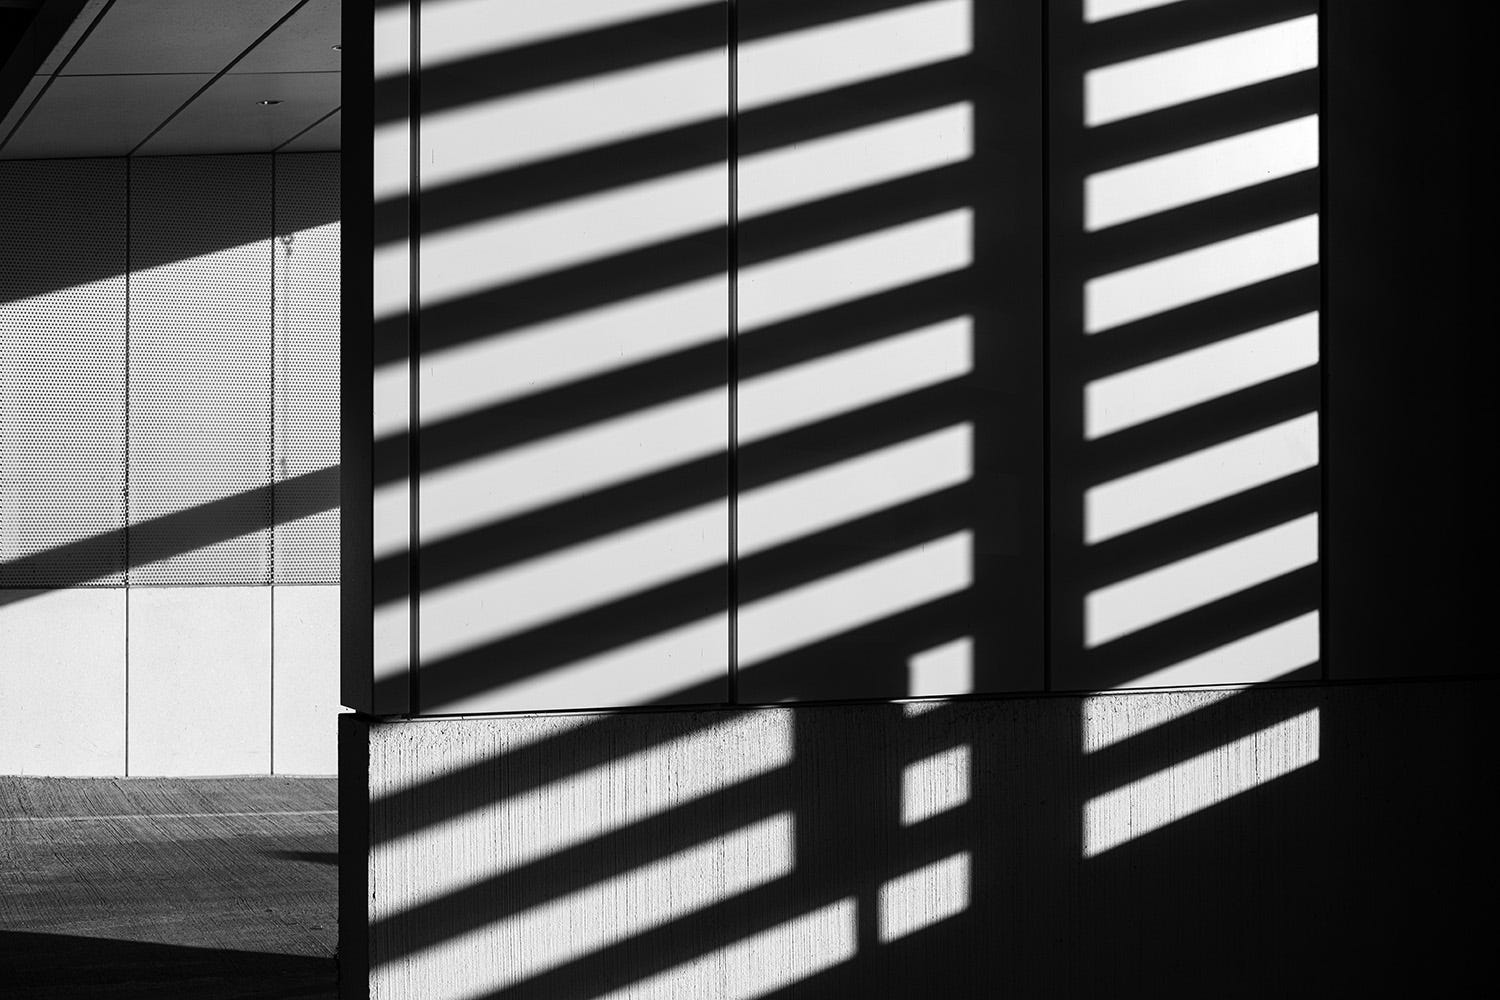 Light pours through the slatted windows of a parking garage casting bold striped shadows throughout the scene. 